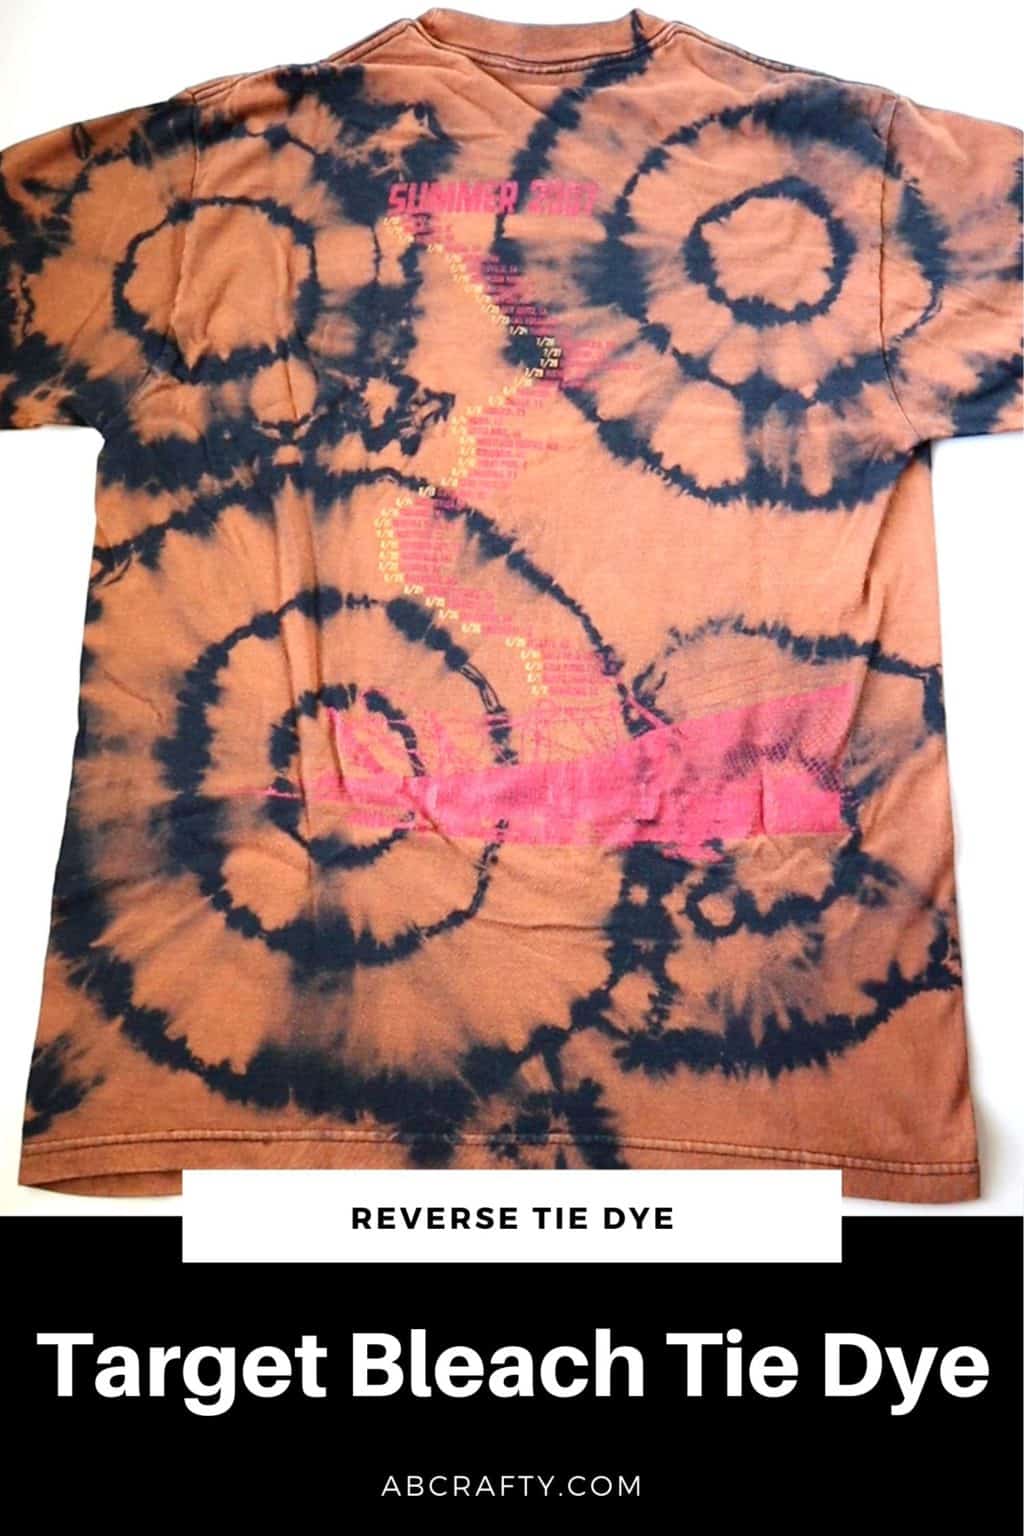 orange and black reverse tie dye t shirt in a target pattern with the title "target bleach tie dye"